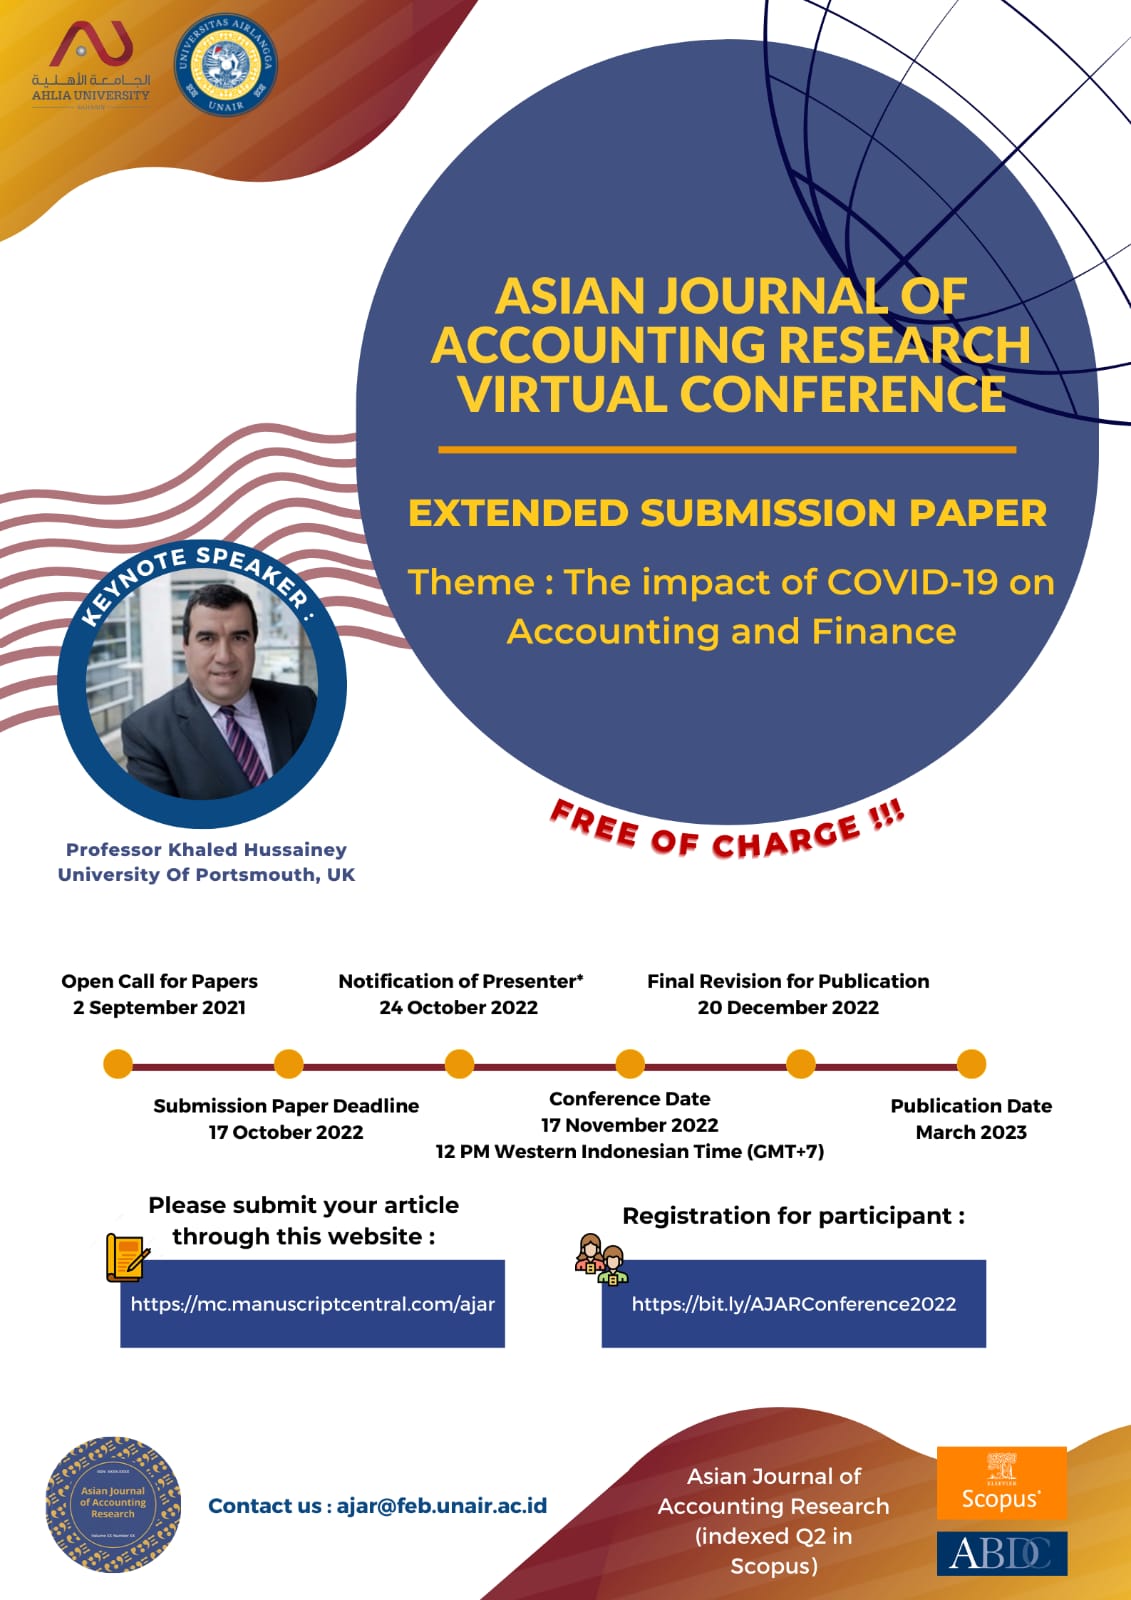 Asian Journal of Accounting Research (AJAR) International Virtual Conference 2022